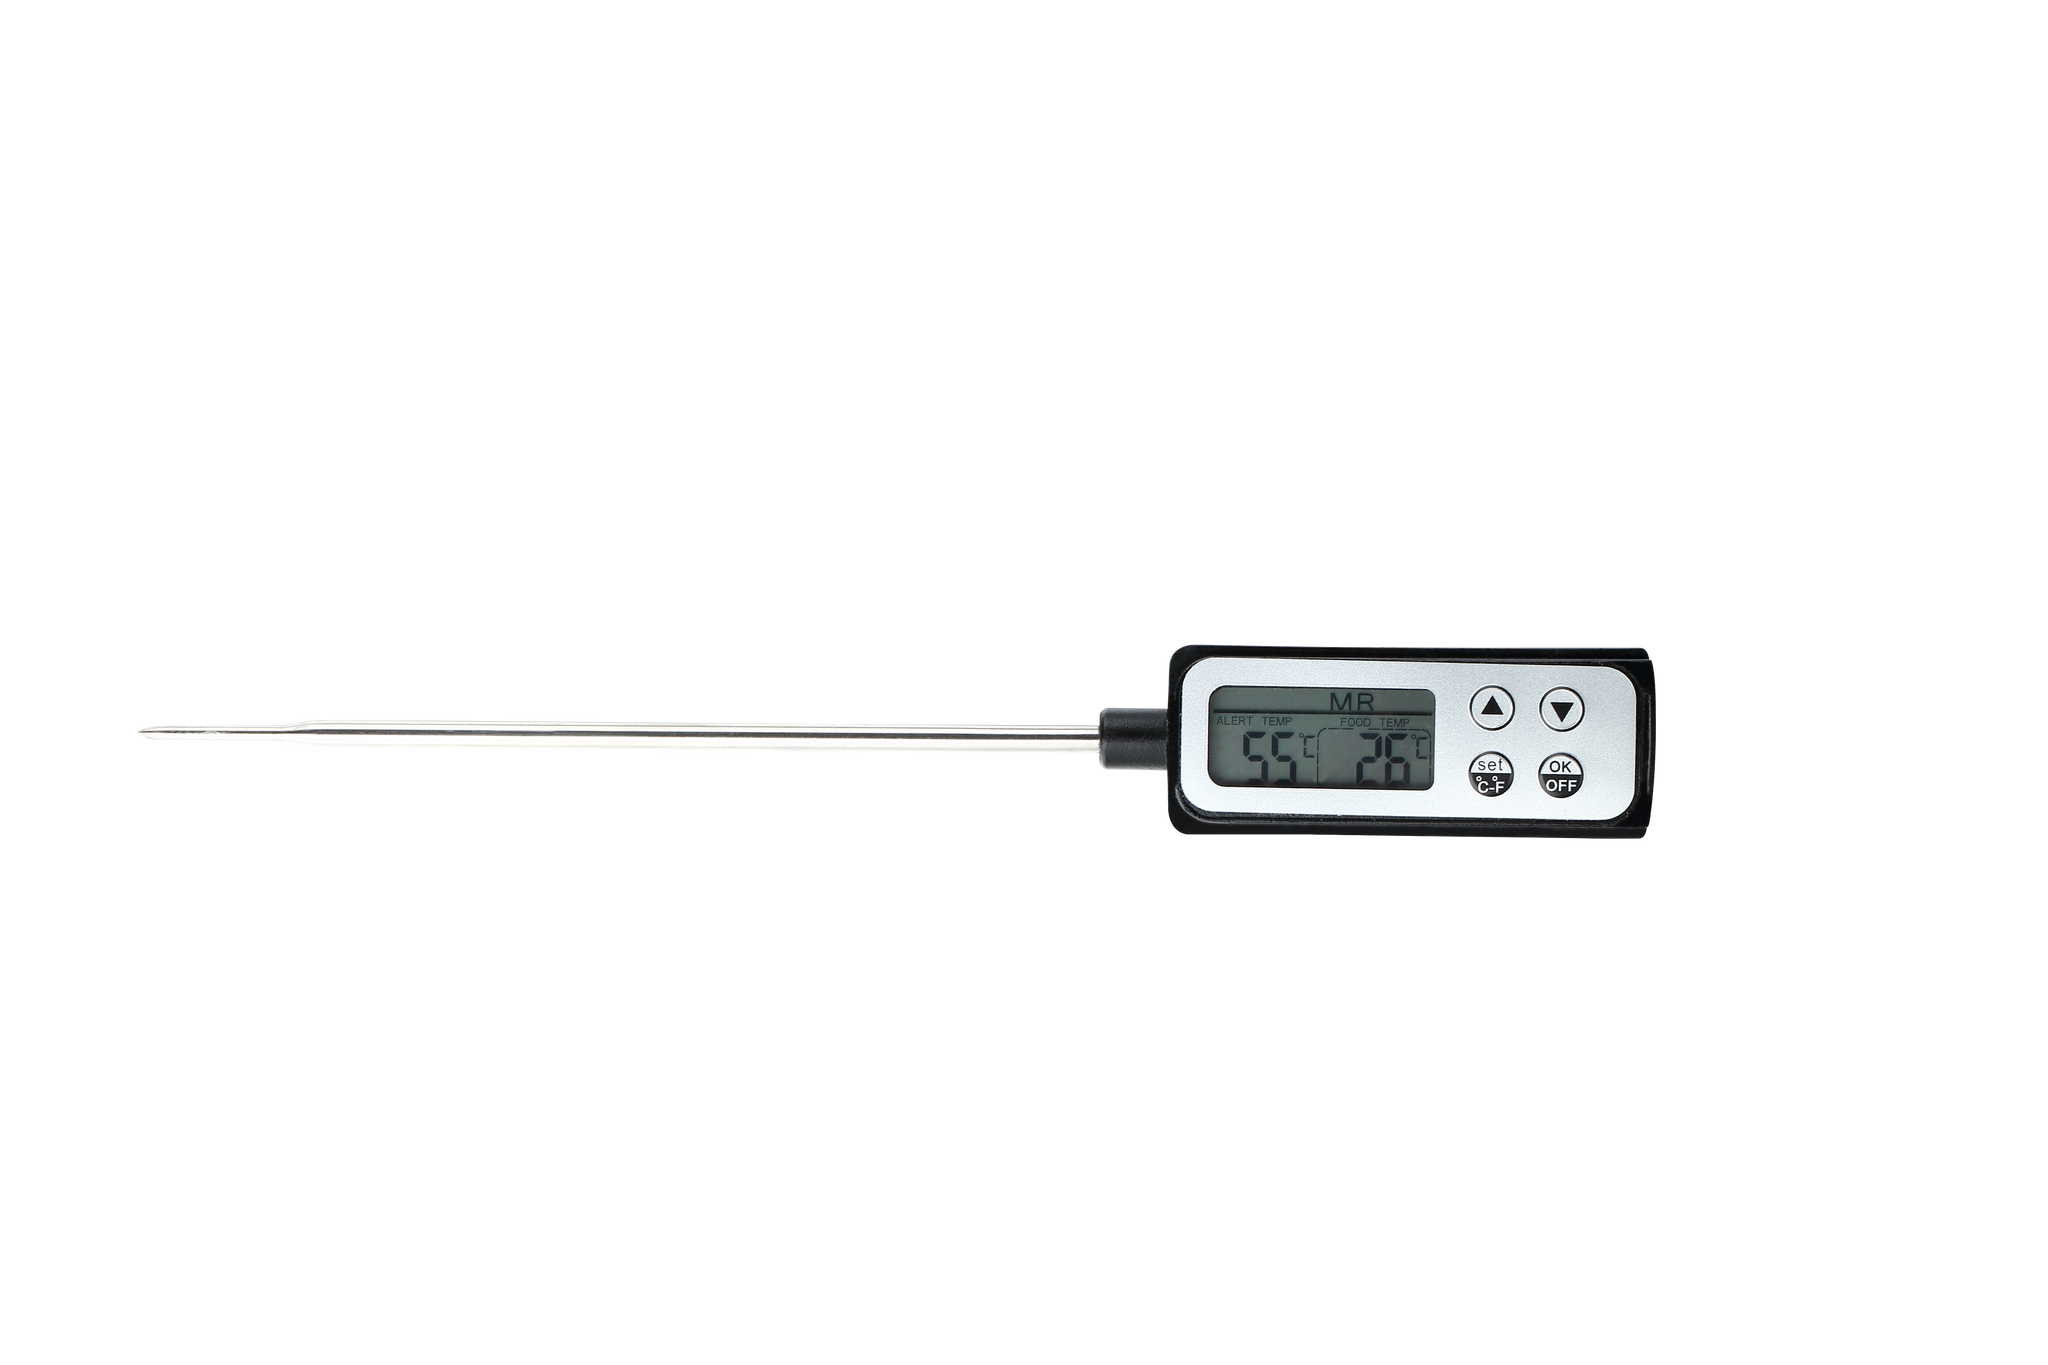 The Temp Master - Digital Food Thermometer